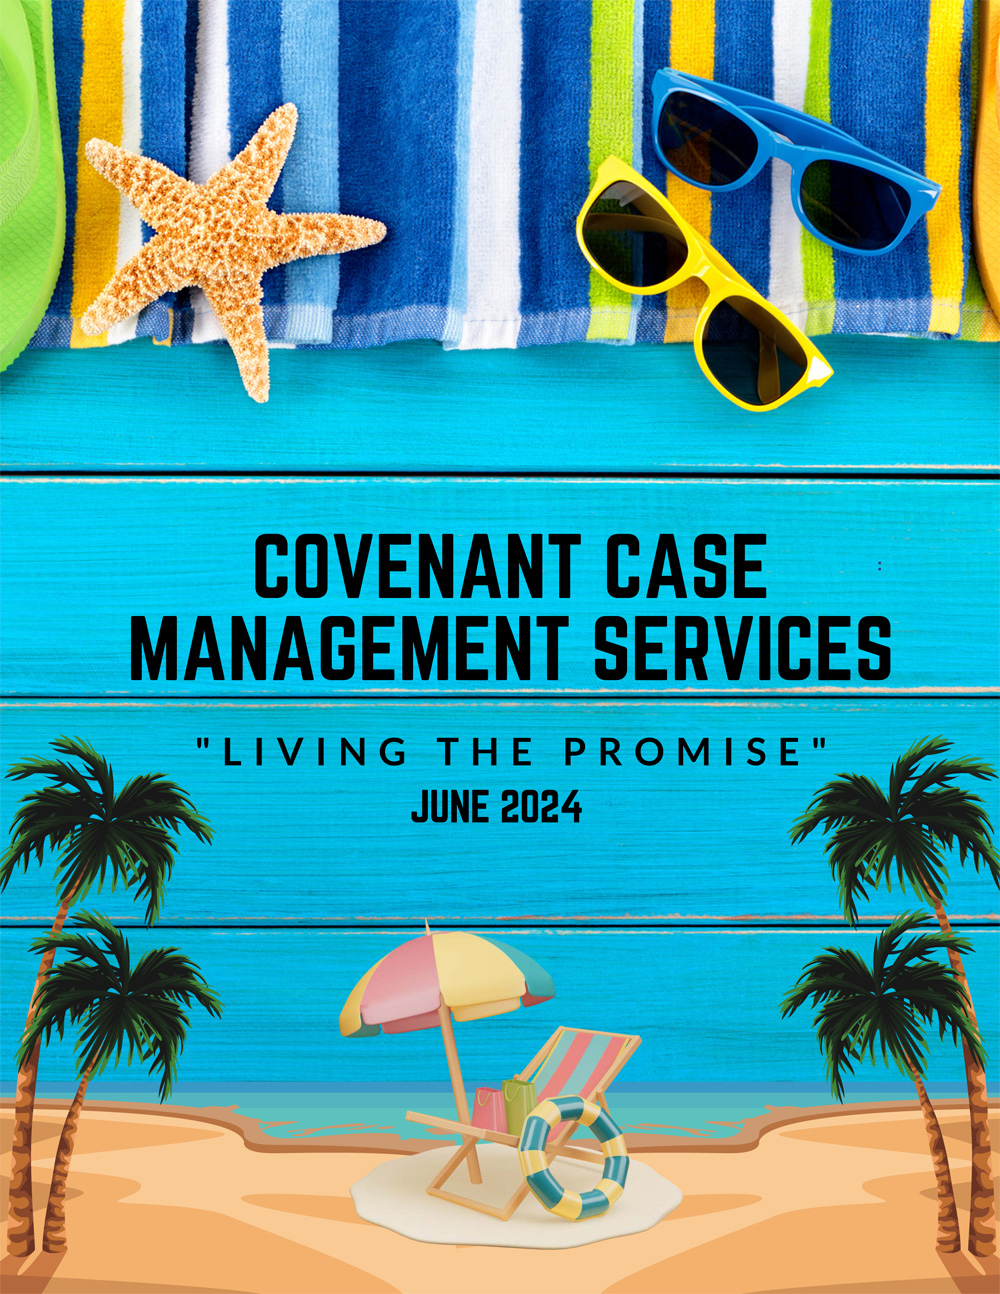 June 2024 Newsletter from Covenant Case Management Services